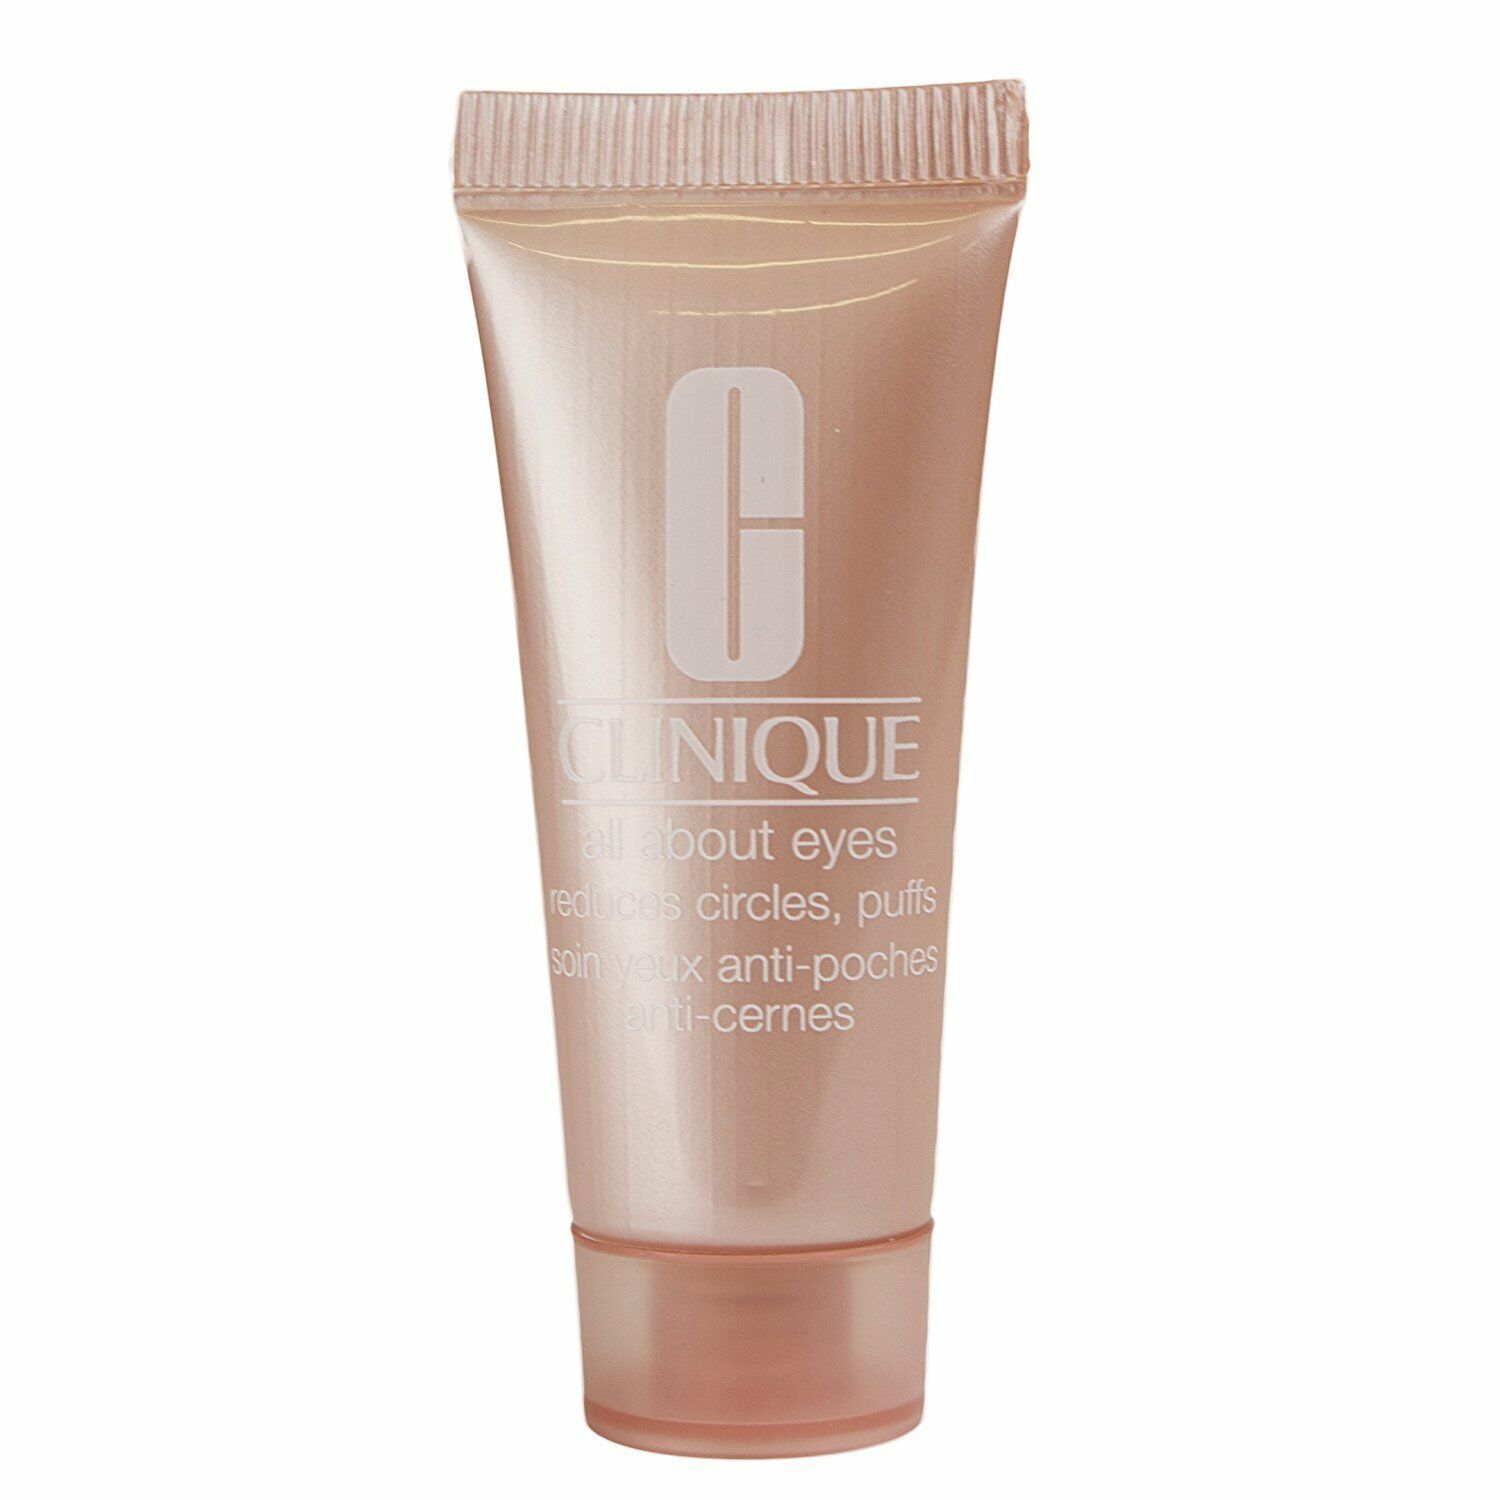 Clinique All About Eyes - Full Size Tube - includes Clinique Pink Sleep Mask  - $13.98